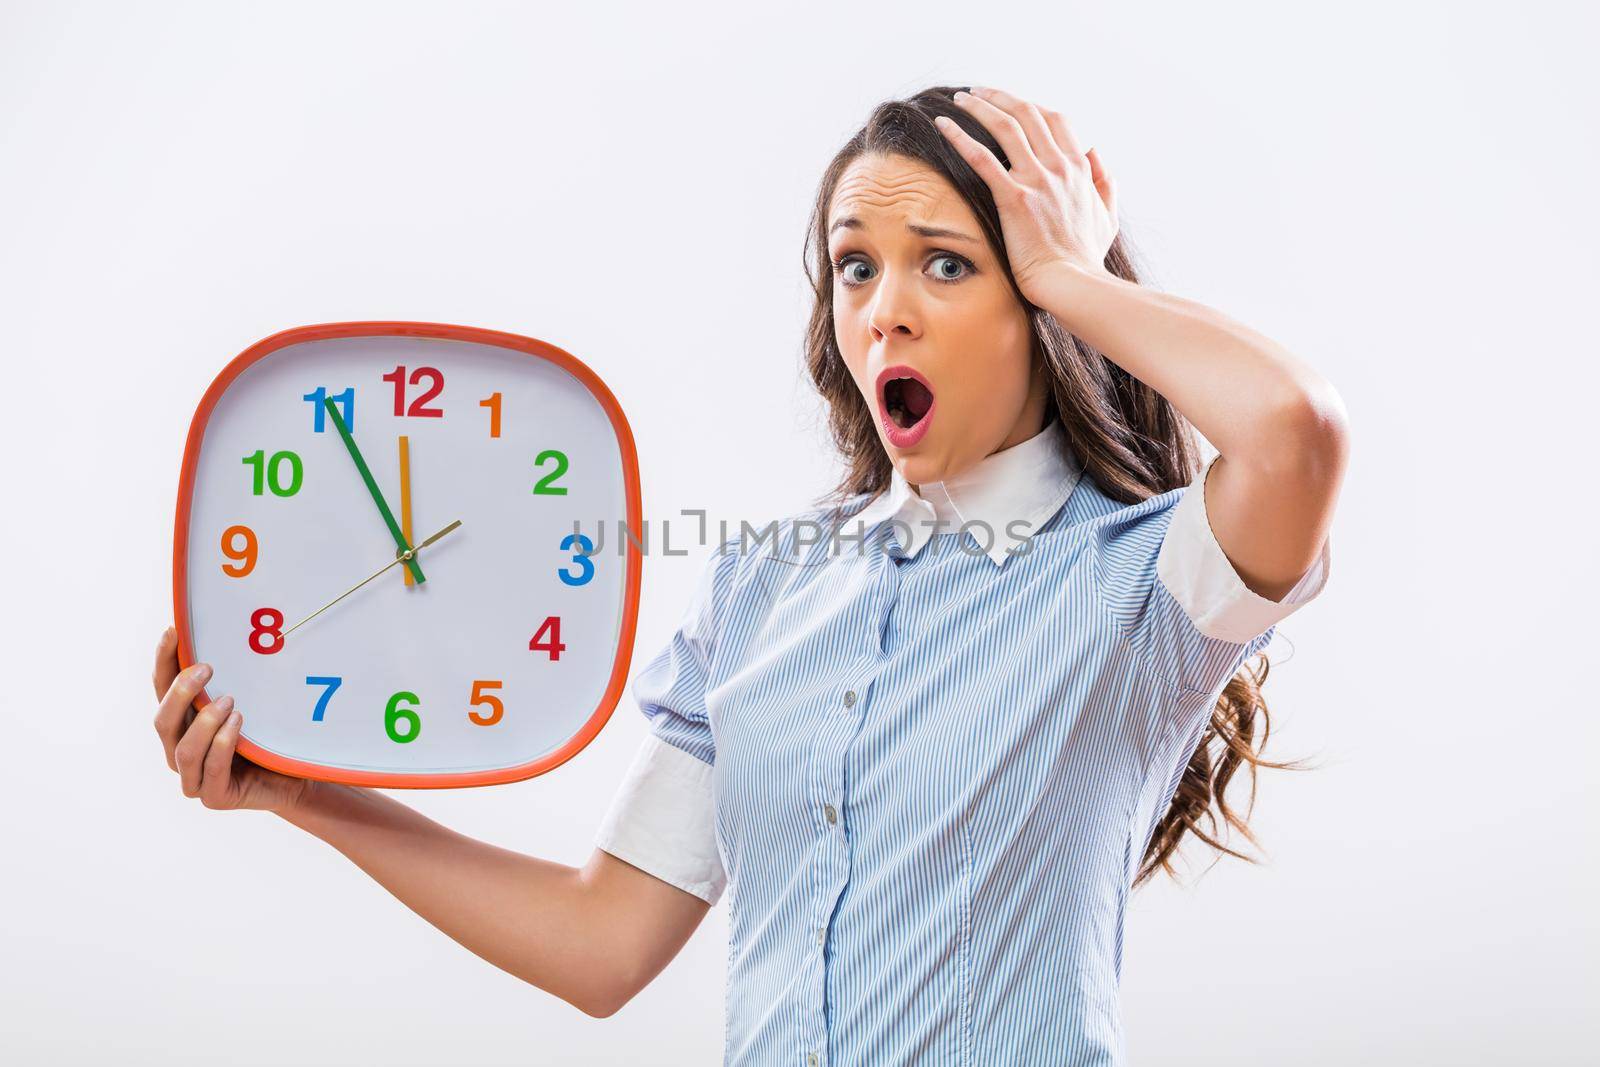 Image of businesswoman in panic holding clock on gray background.